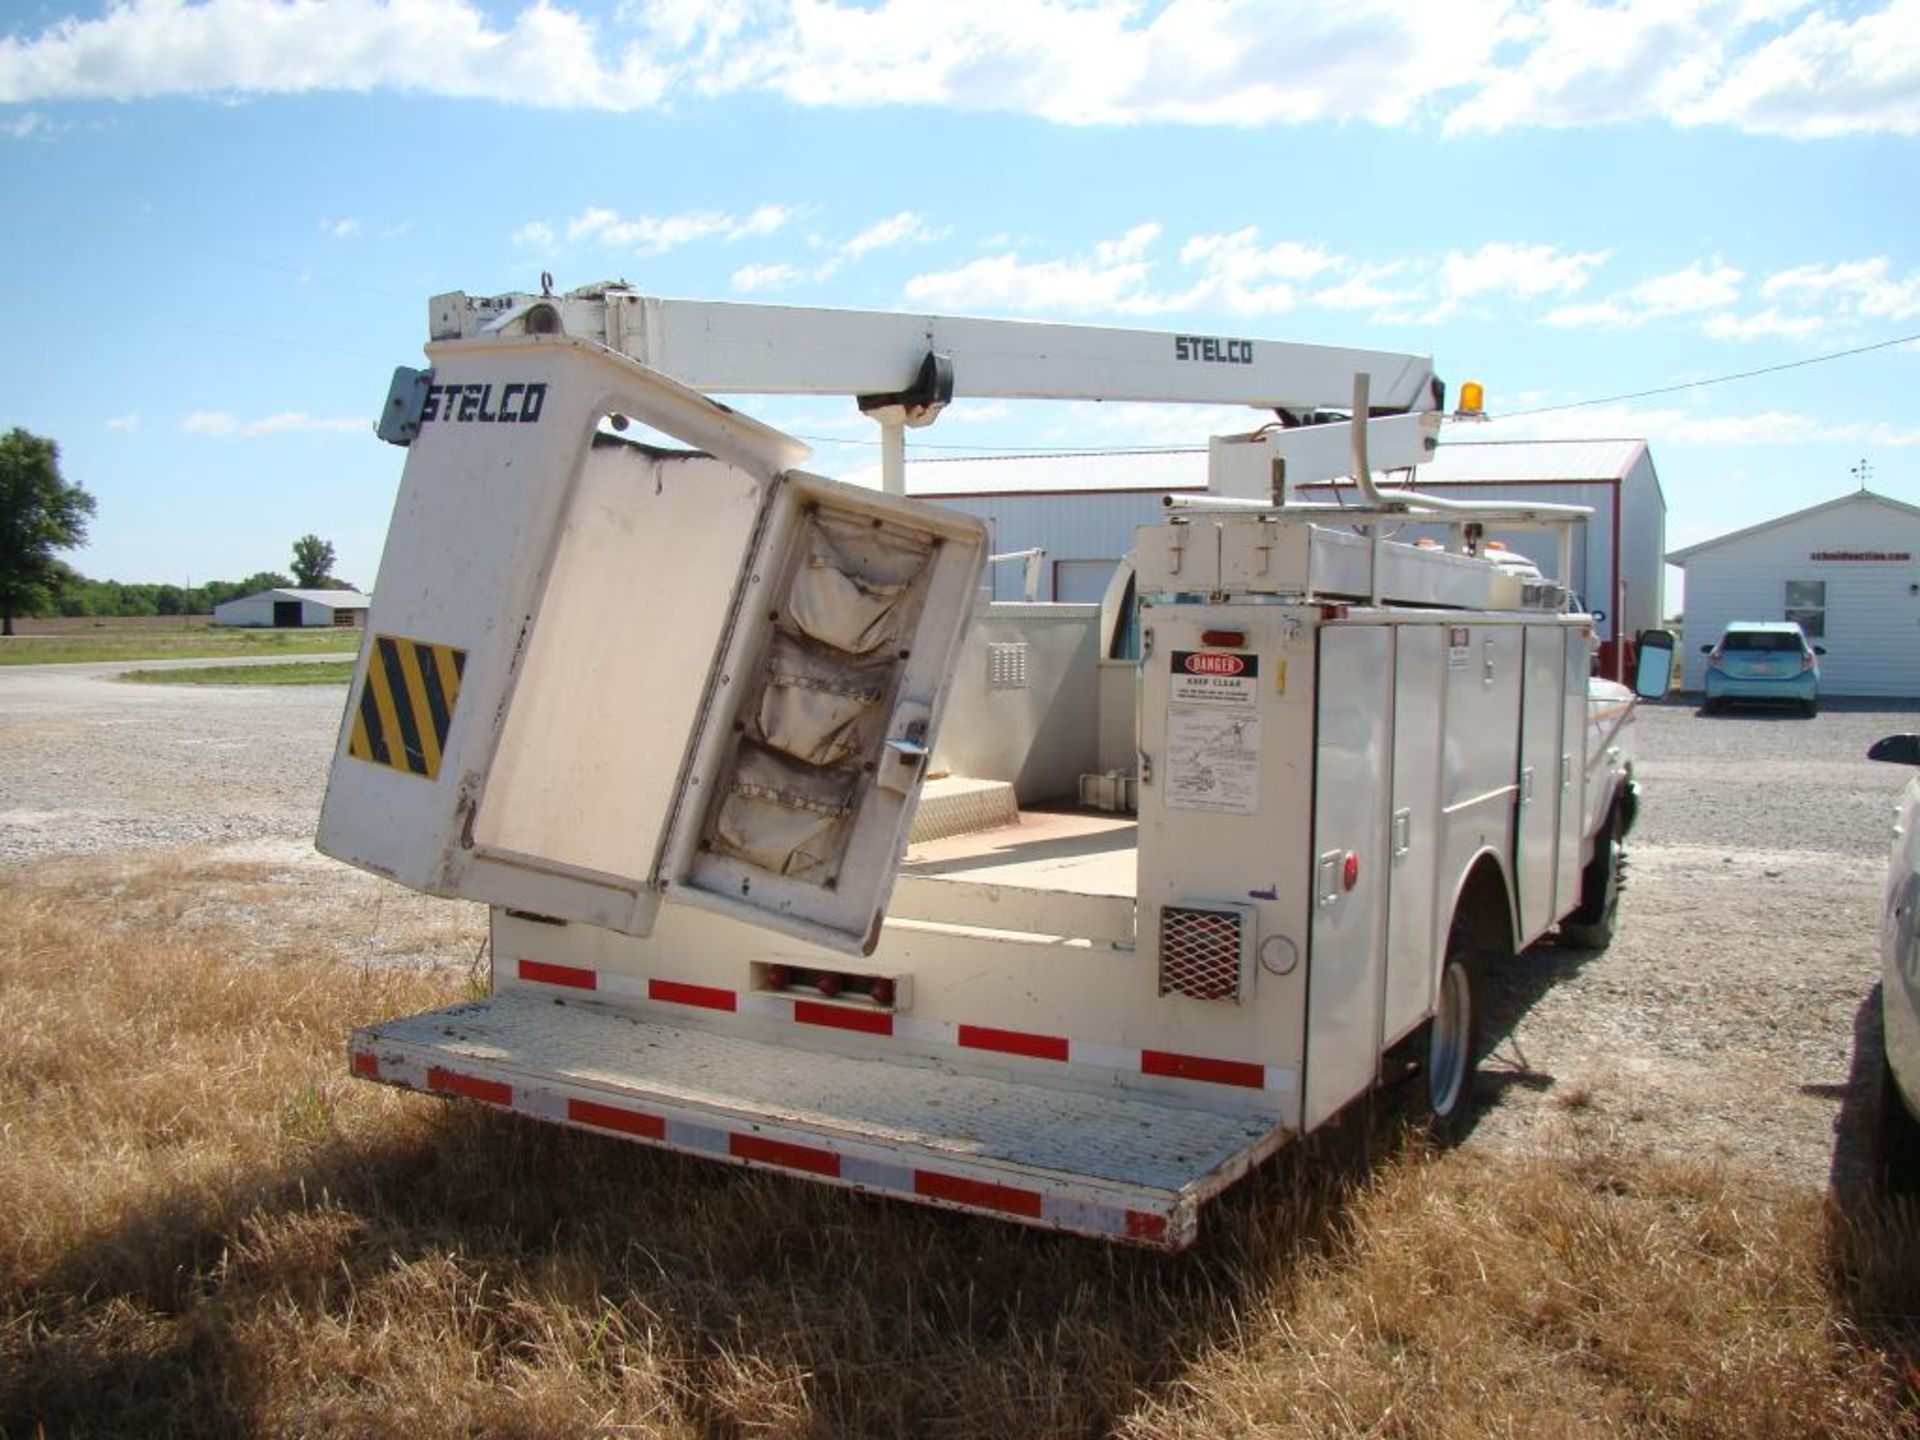 (Title) 1989 Ford F350 bucket truck, 7.3L diesel,4 speed with overdrive, Stelco bucket lift mofel - Image 14 of 18